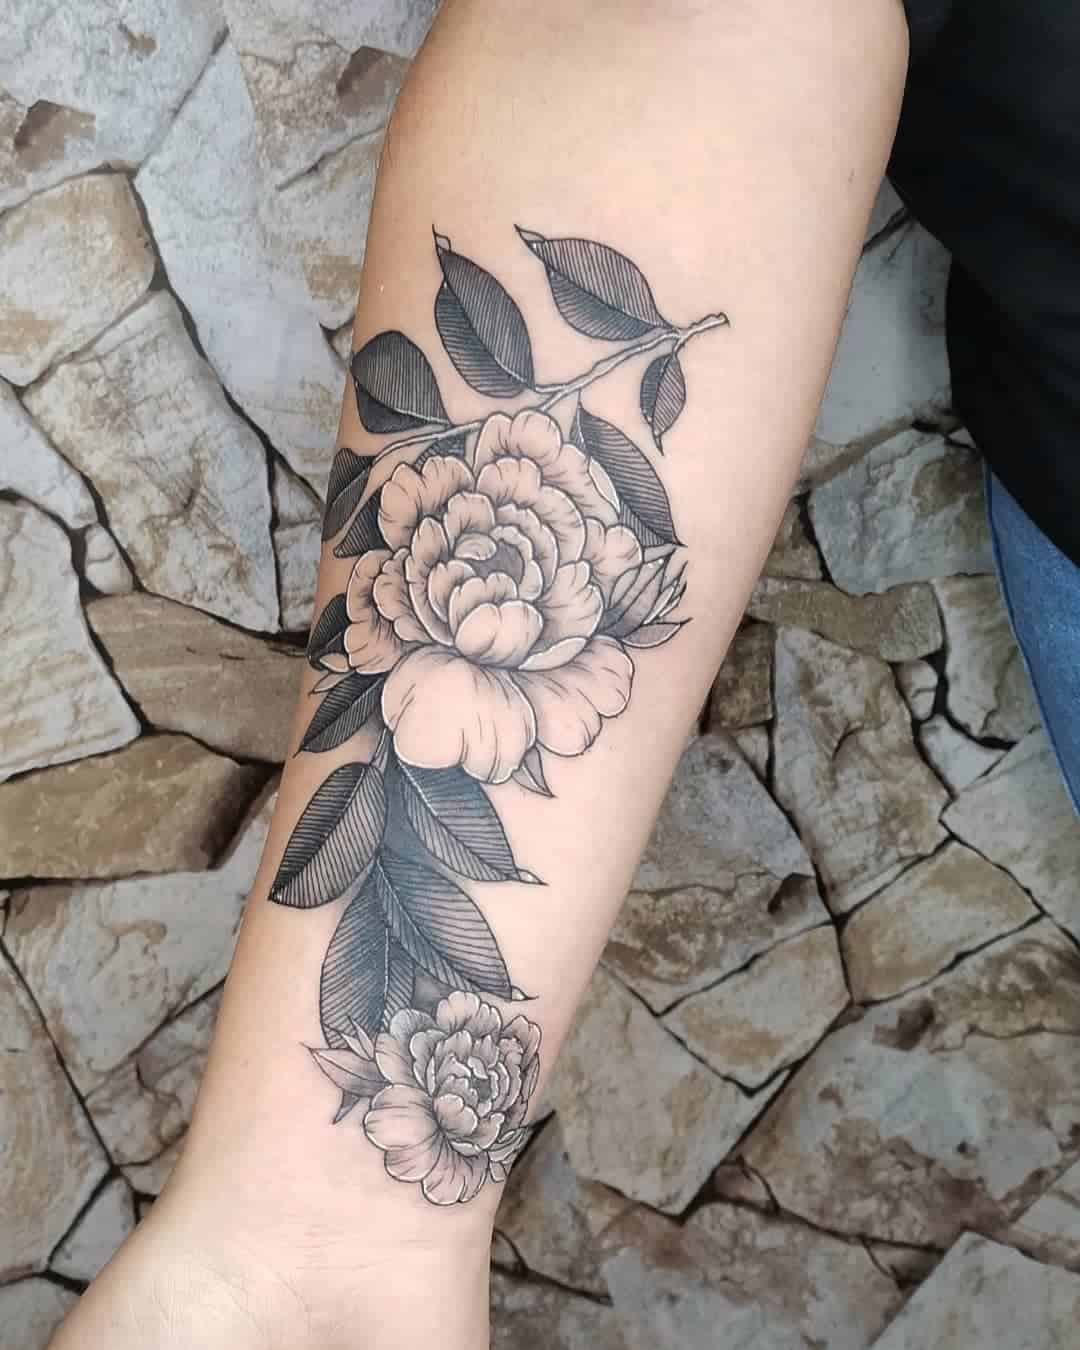 Floral tattoo cover up ideas